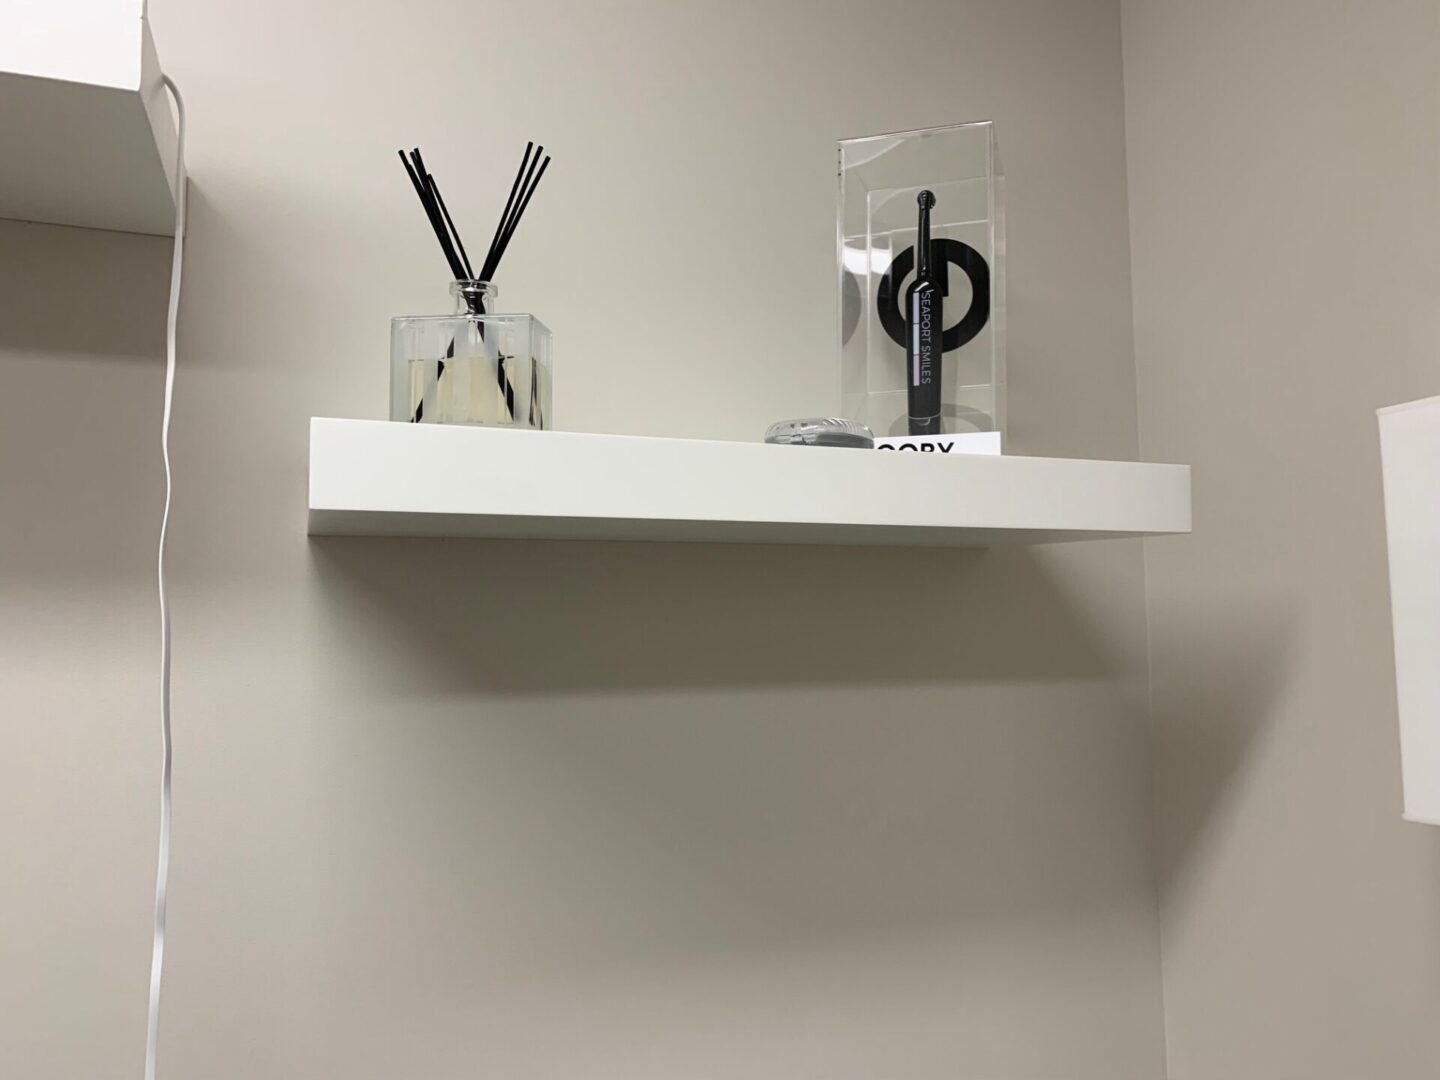 Close view of the wall shelf with two items on it